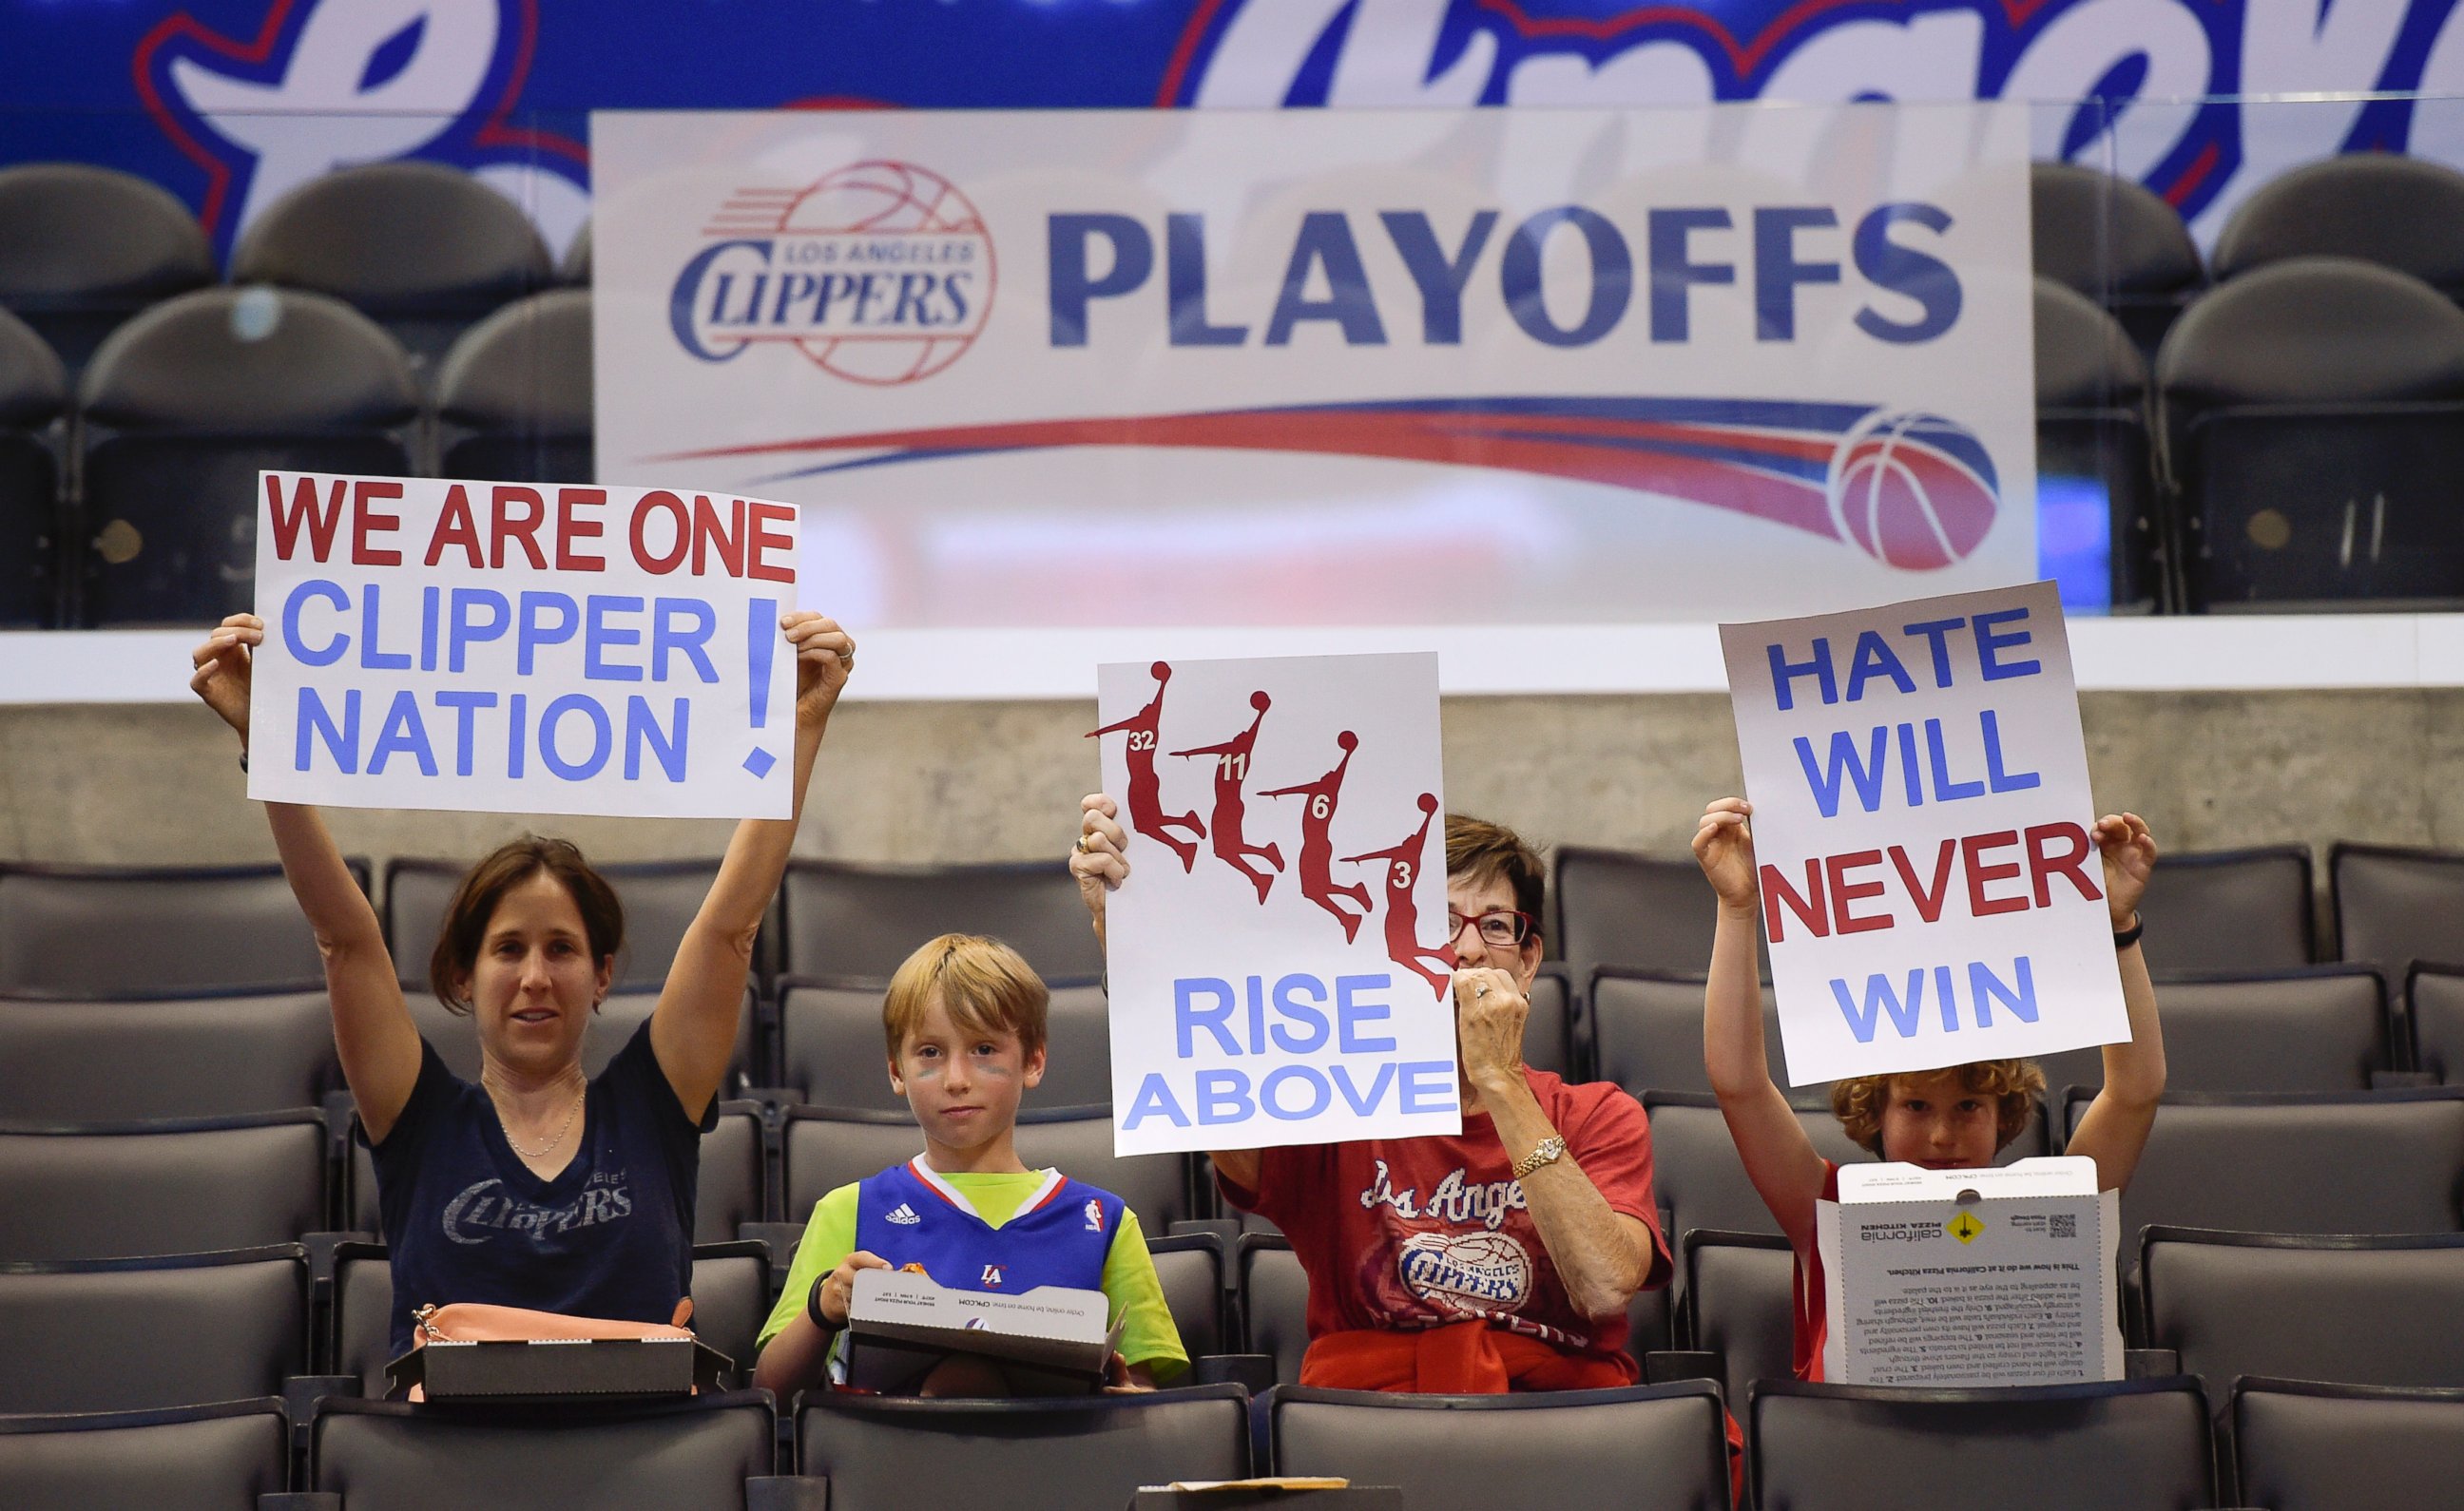 PHOTO: Fans hold up signs in support of the Los Angeles Clippers before Game 5 of an opening-round NBA basketball playoff series between the Clippers and the Golden State Warriors, April 29, 2014, in Los Angeles.